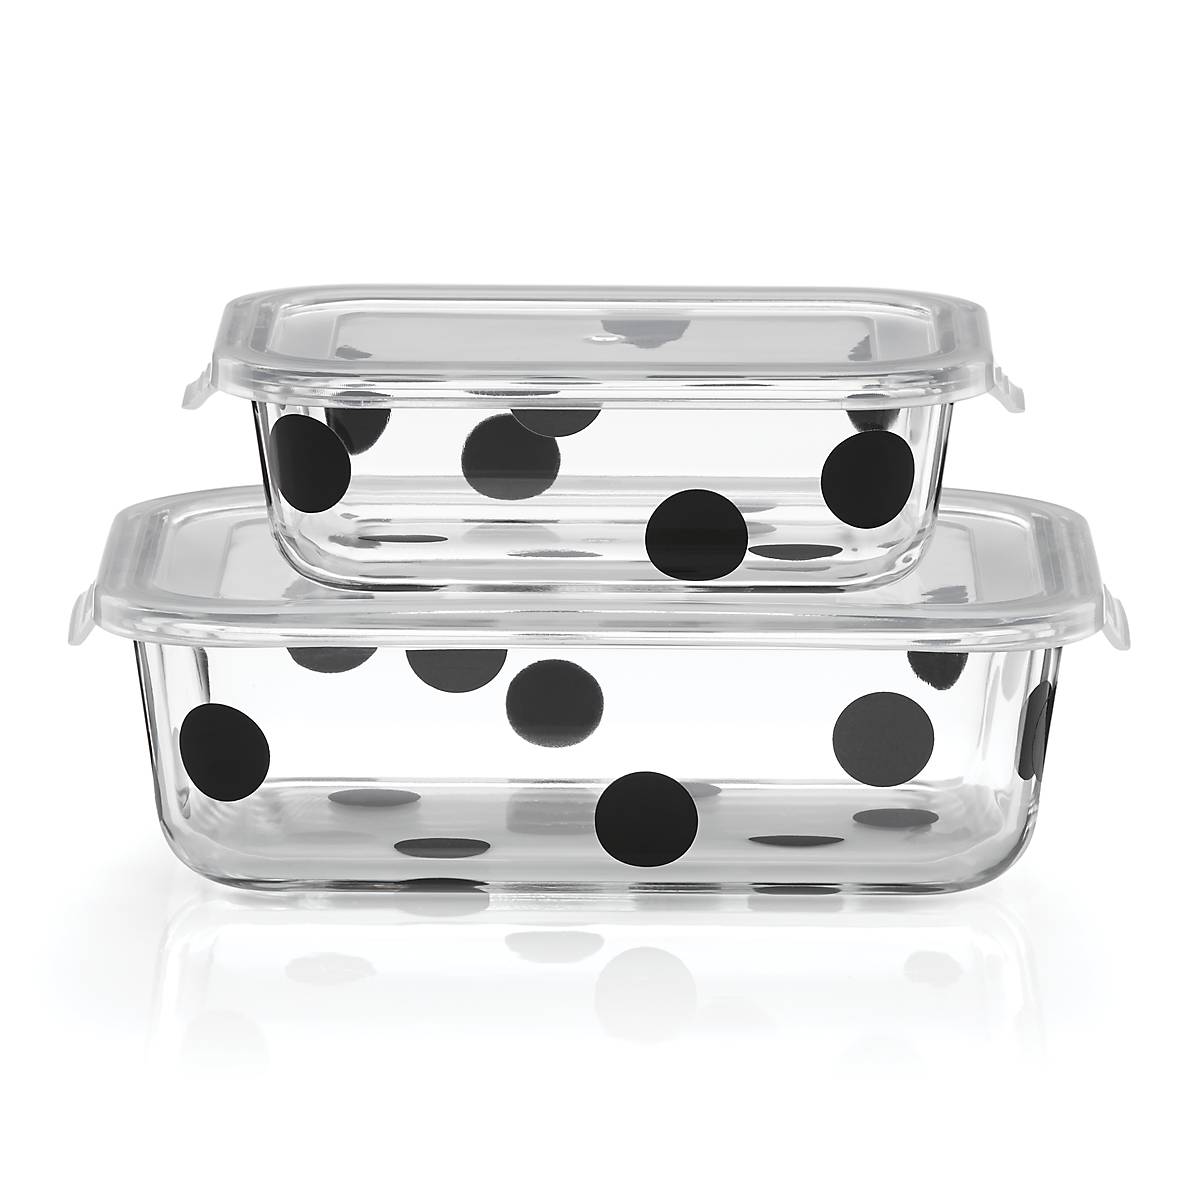 Pretty Food Storage Containers